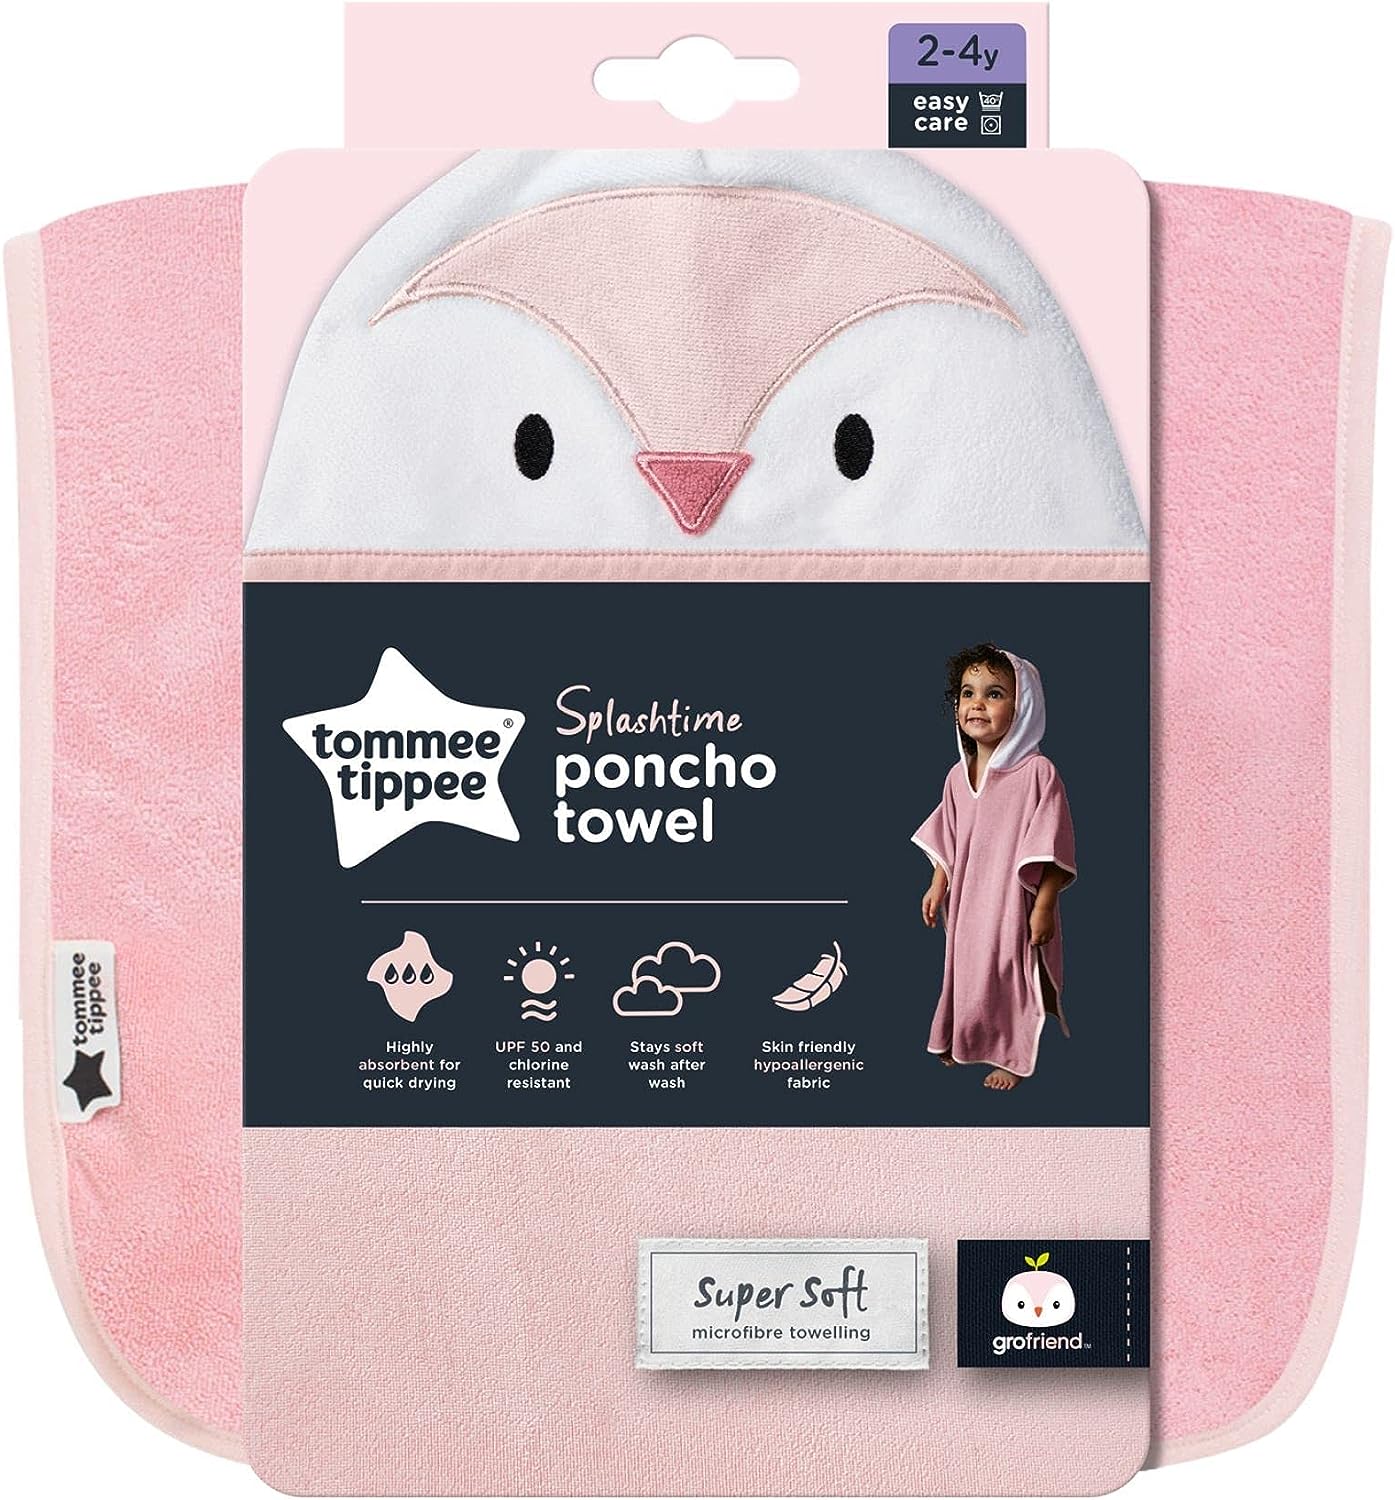 Tommee Tippee Splashtime Hooded Poncho Towel, Highly Absorbent and Super Soft Microfibre Material, Hypoallergenic, 2-4 Years, Penny the Penguin Grofriend, Pink